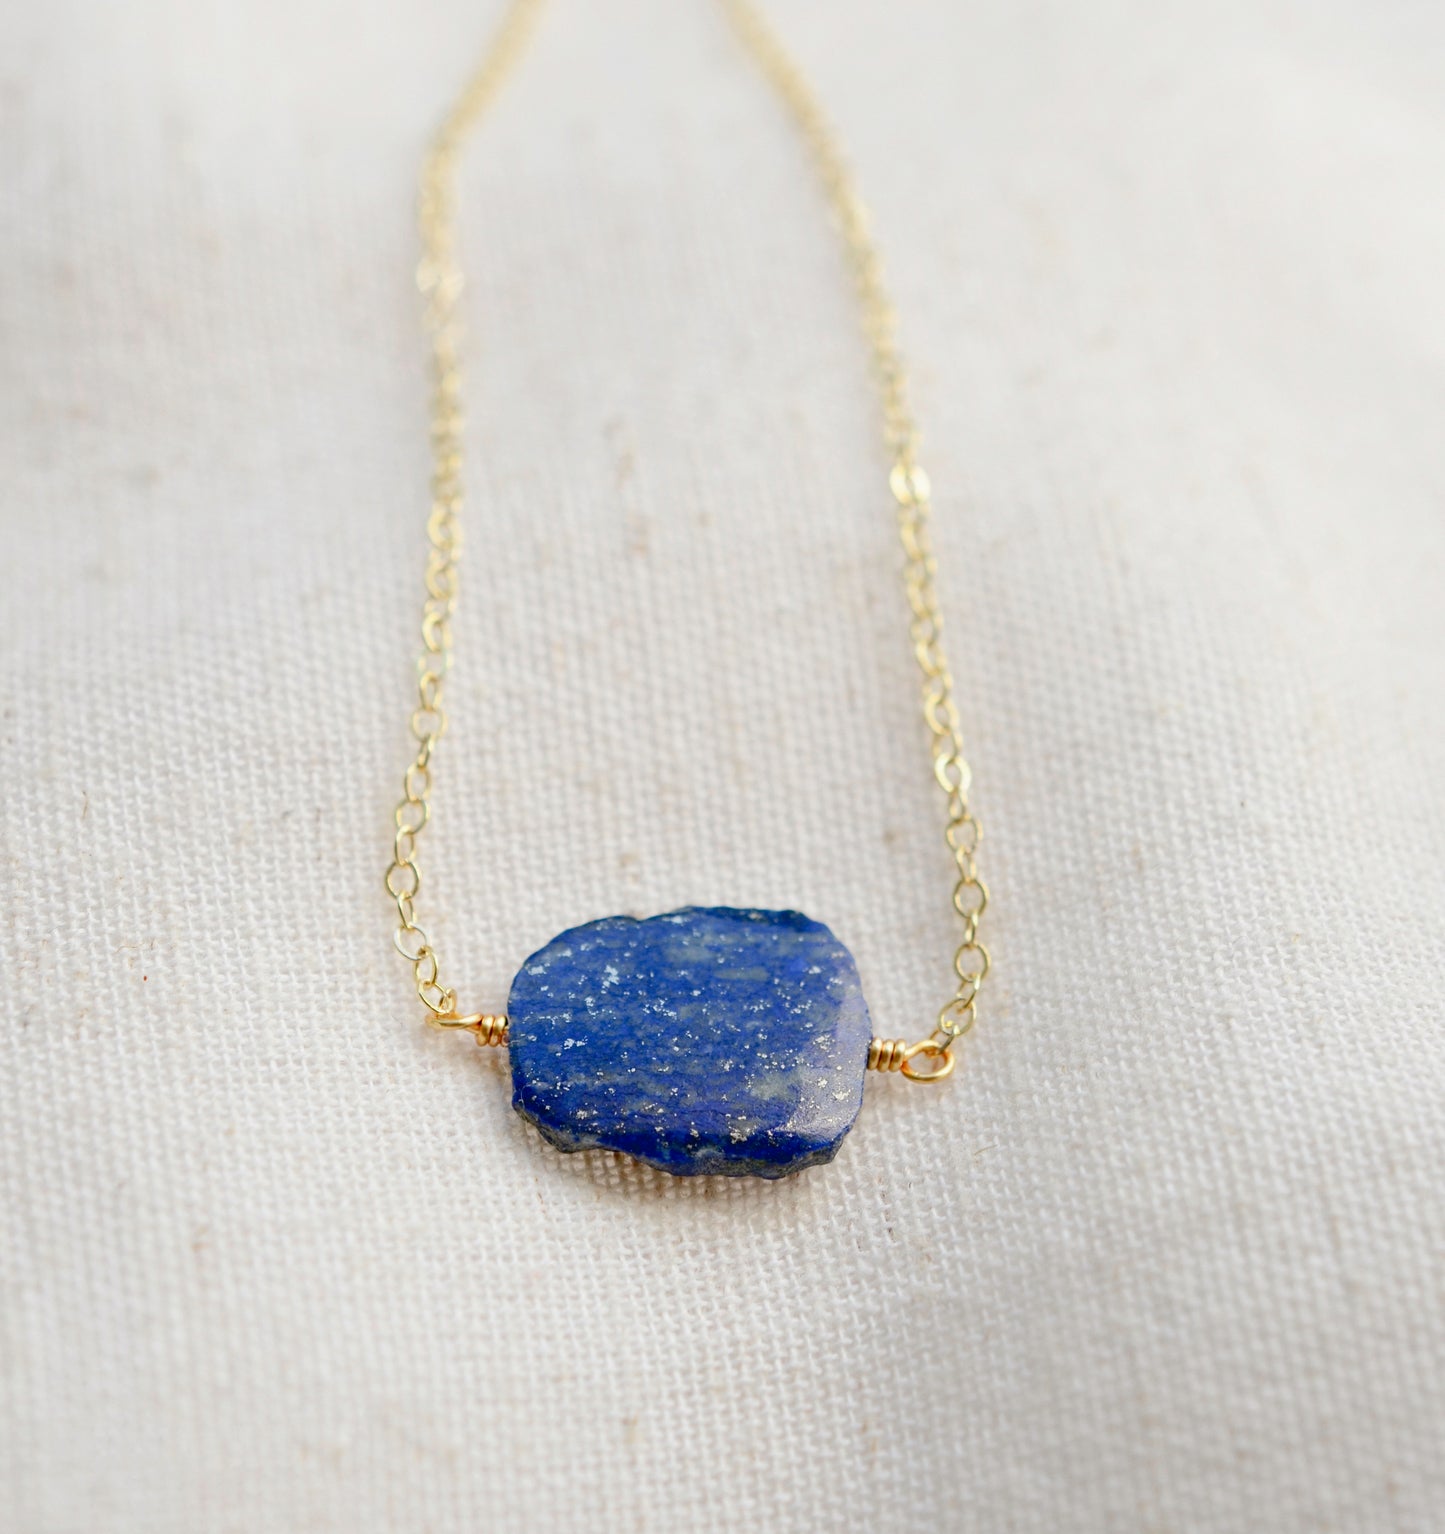 Natural blue lapis lazuli slice set onto a 14k gold filled chain. The stone is smooth polished with raw edges and oval in shape. Natural pyrite and calcite flecks are visible within each stone. 